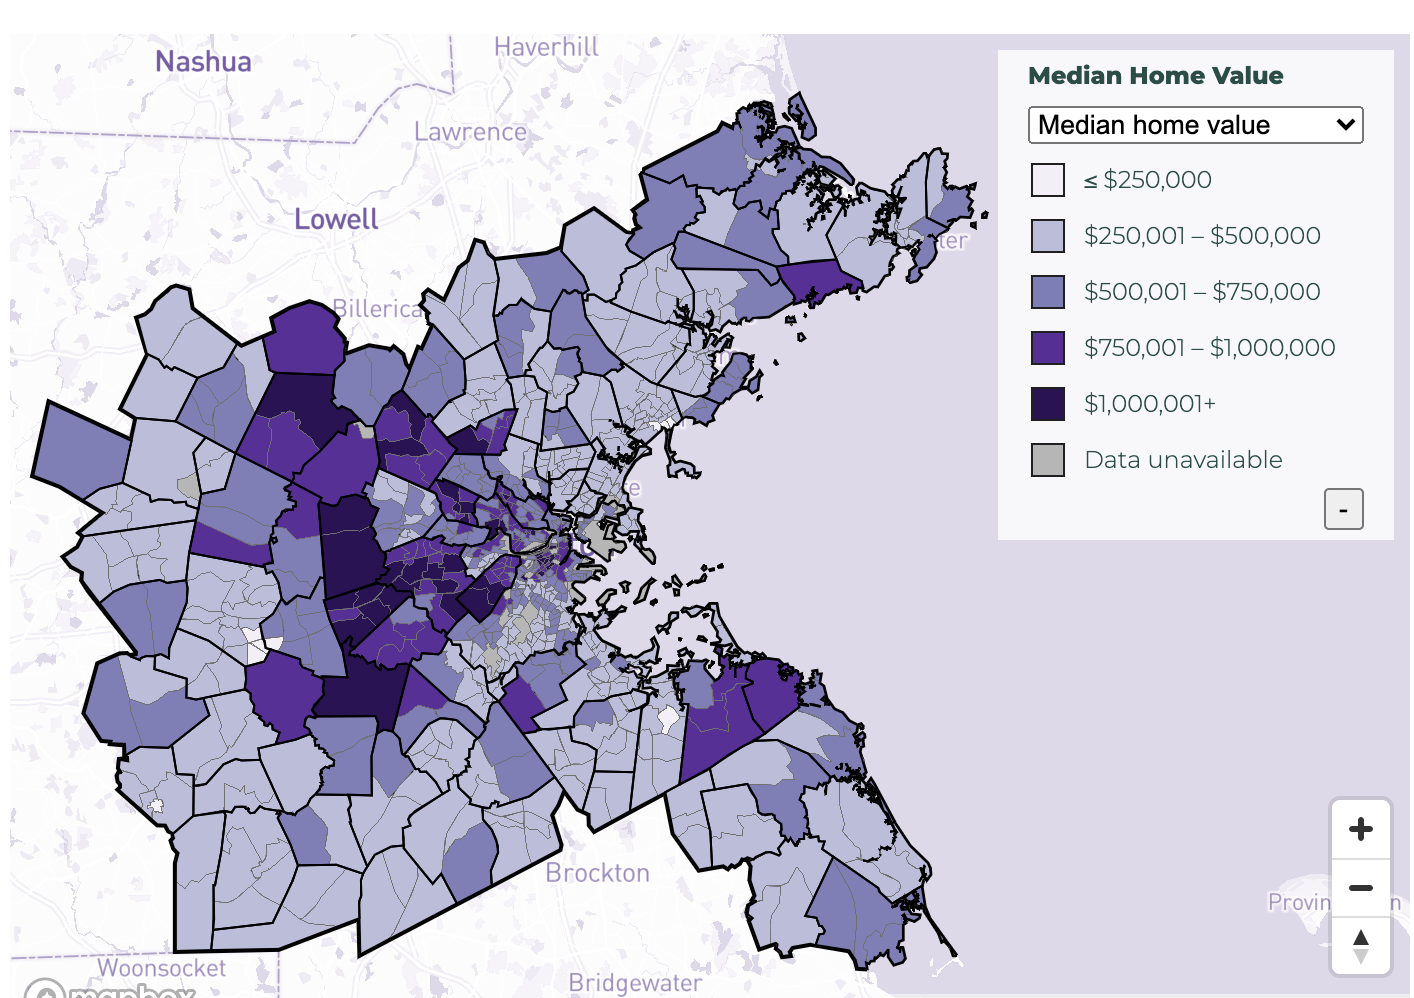 "Exploring the Housing Markets in Greater Boston" data visualization from the Metropolitan Area Planning Council (MAPC)'s DataCommon